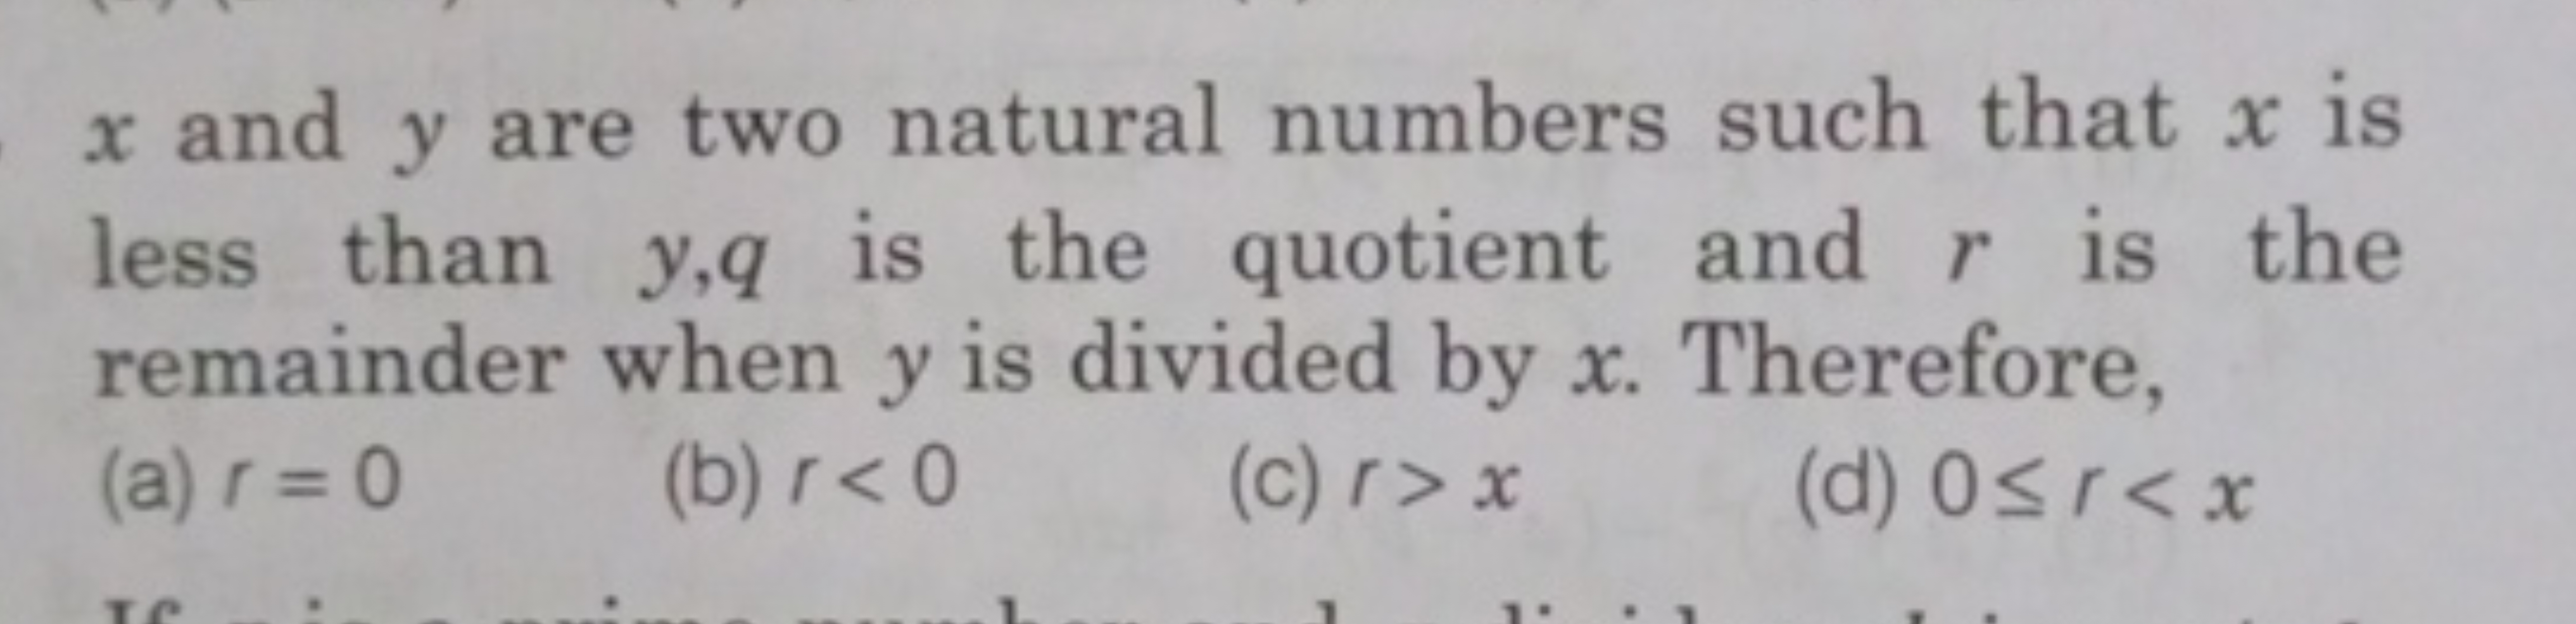 x and y are two natural numbers such that x is less than y,q is the qu